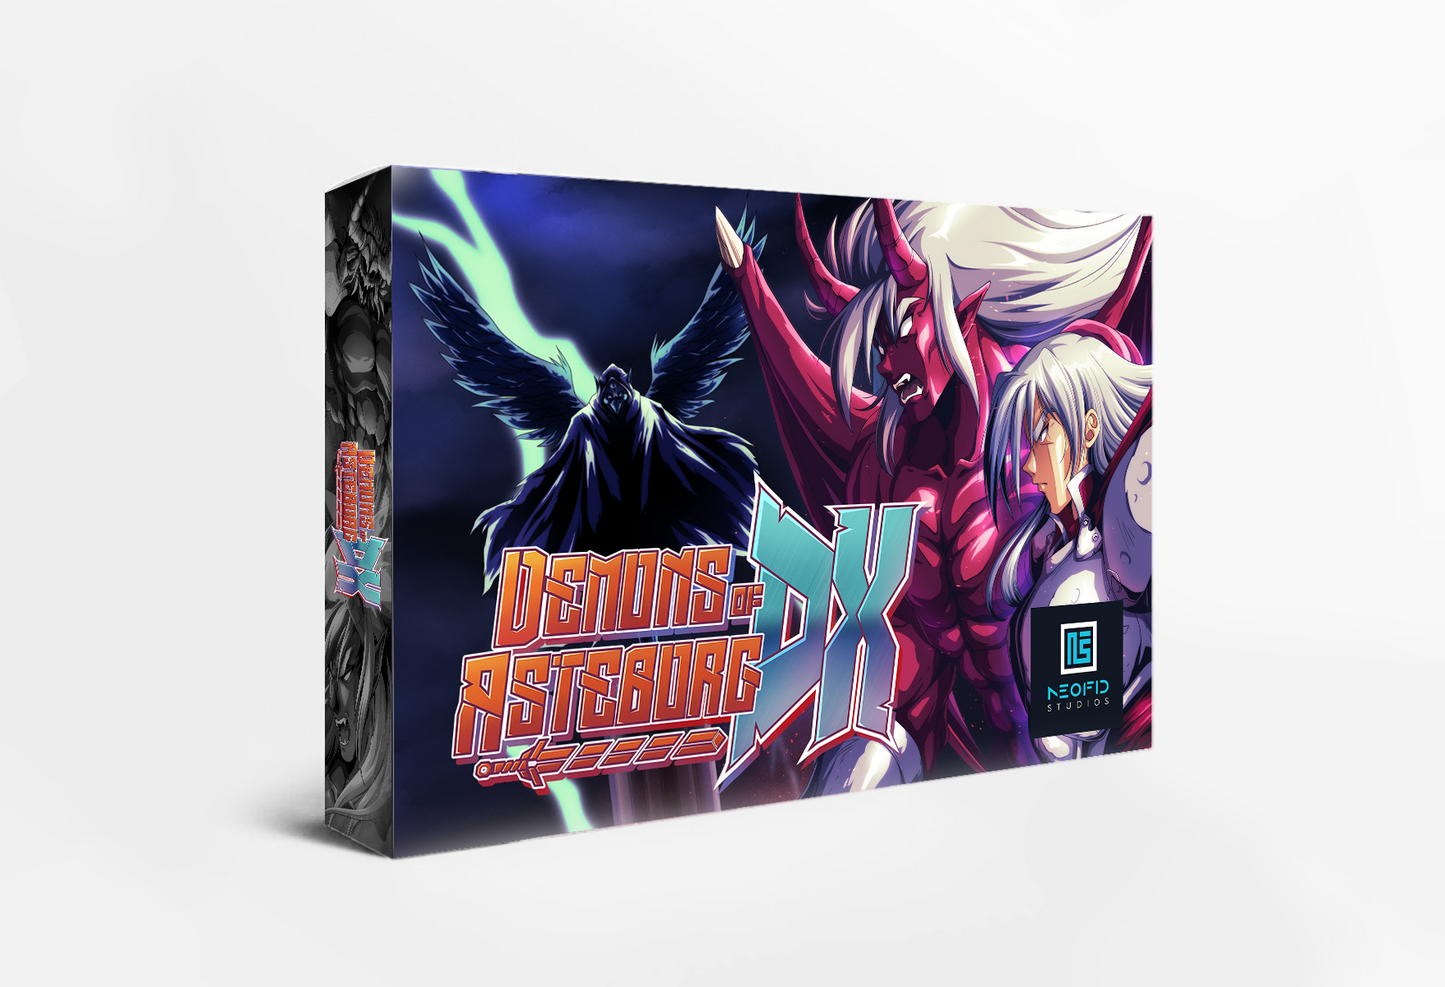 [PRE-ORDER] Demons of Asteborg DX Investor's Edition (new boxed cartridge with printed manual for Game Boy Advance)